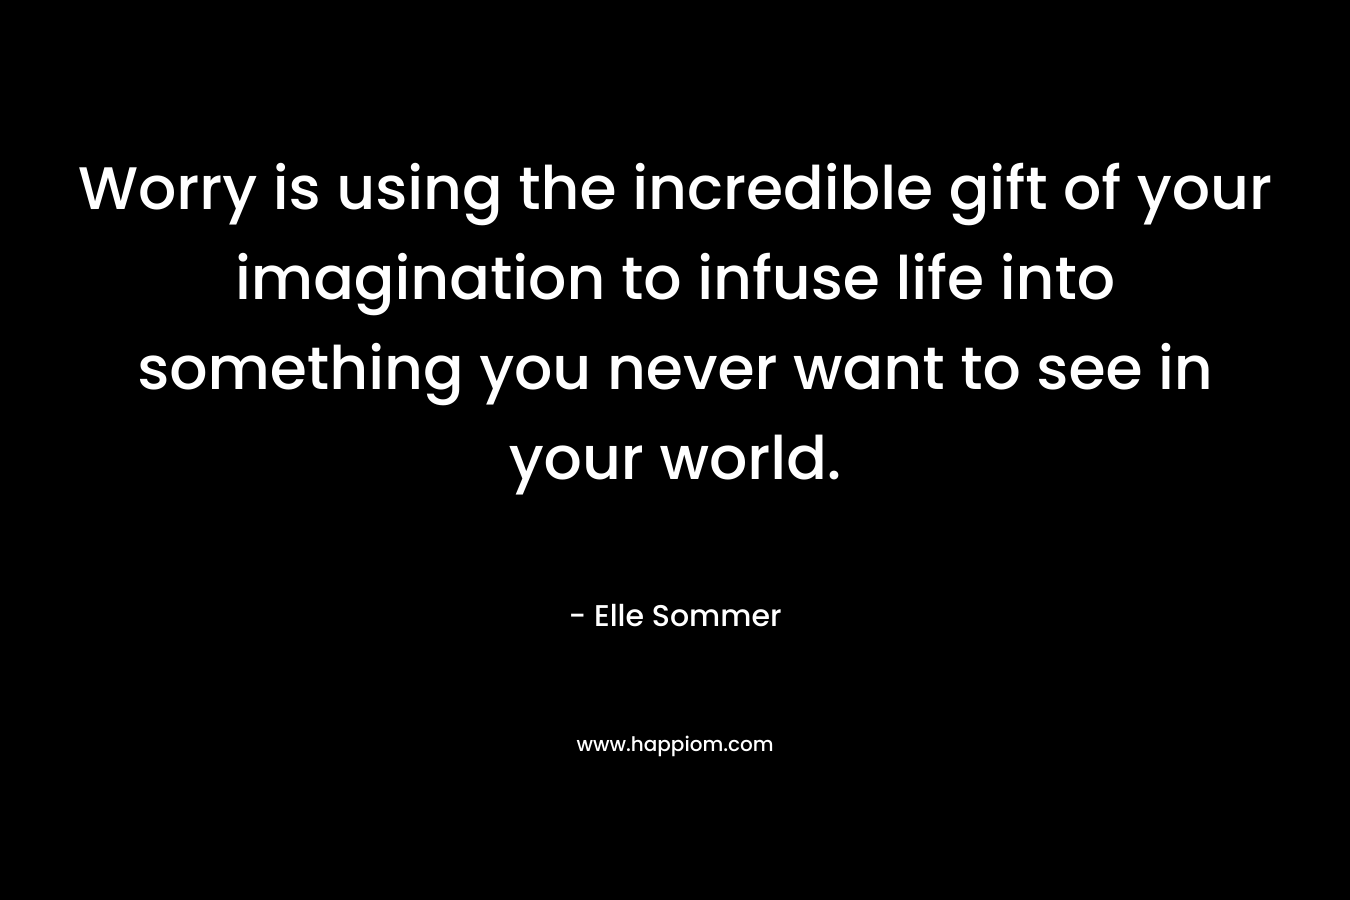 Worry is using the incredible gift of your imagination to infuse life into something you never want to see in your world. – Elle Sommer